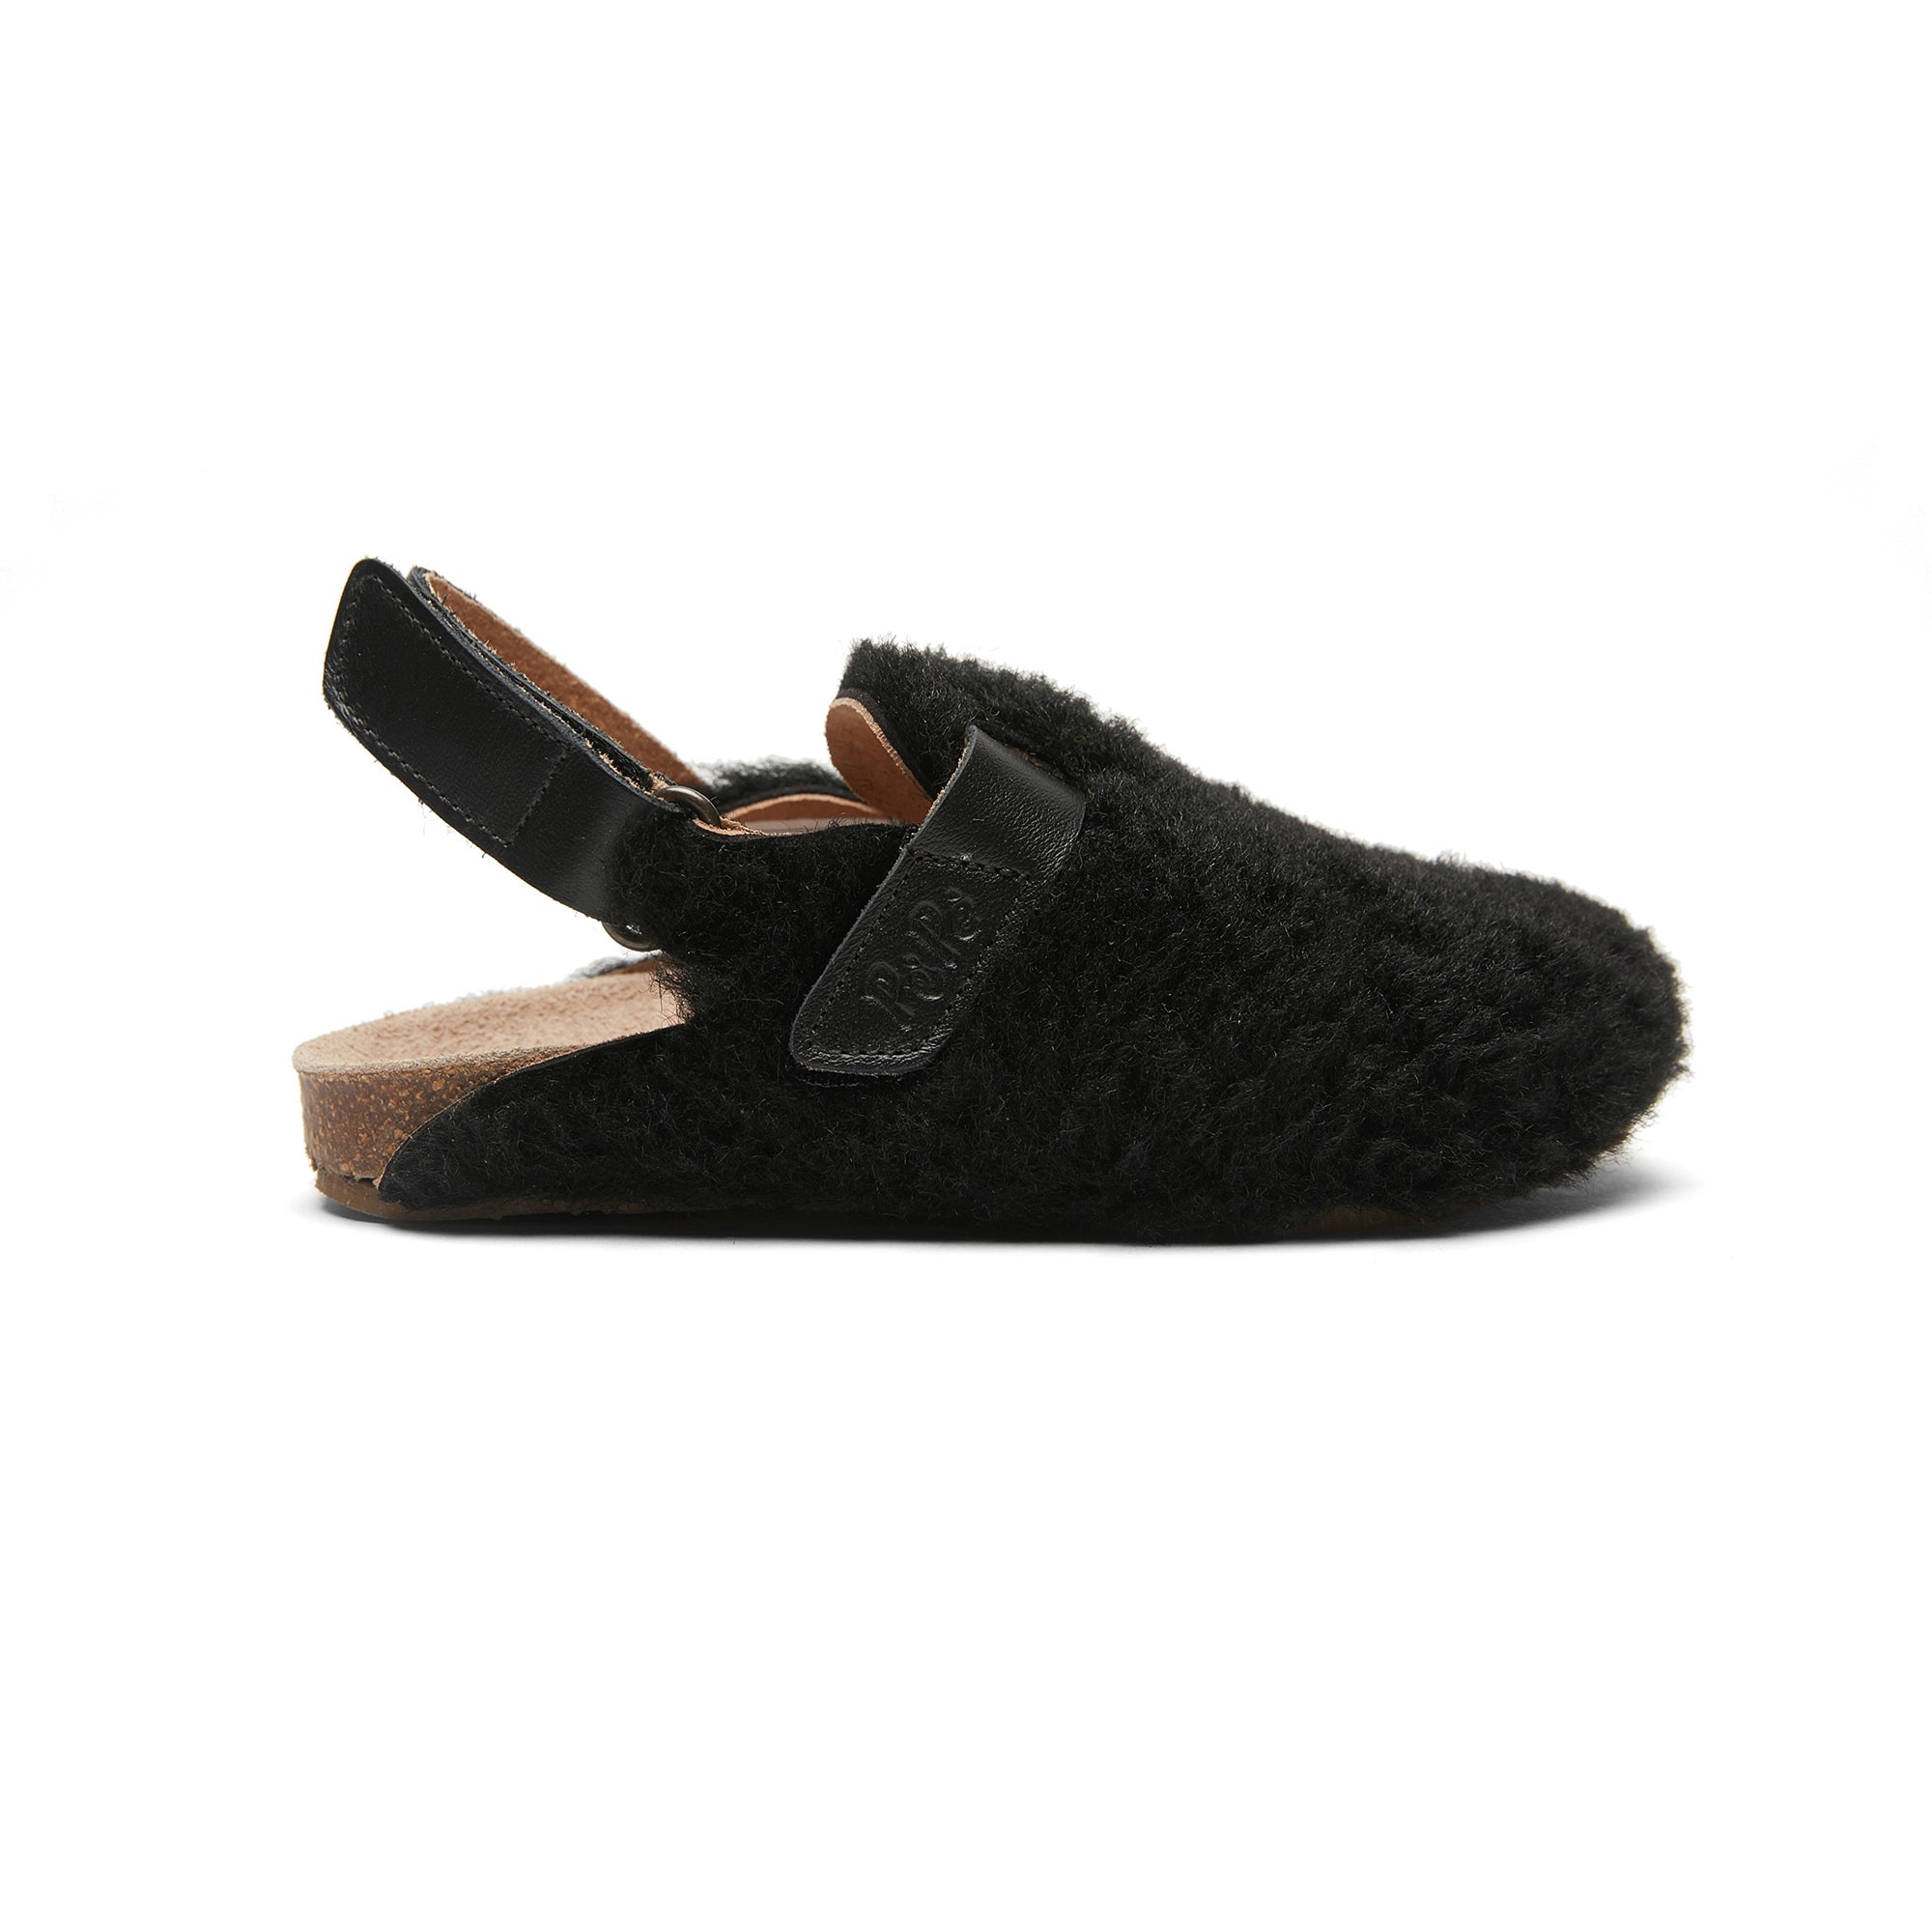 Boys & Girls Black Slippers With Ankle Strap